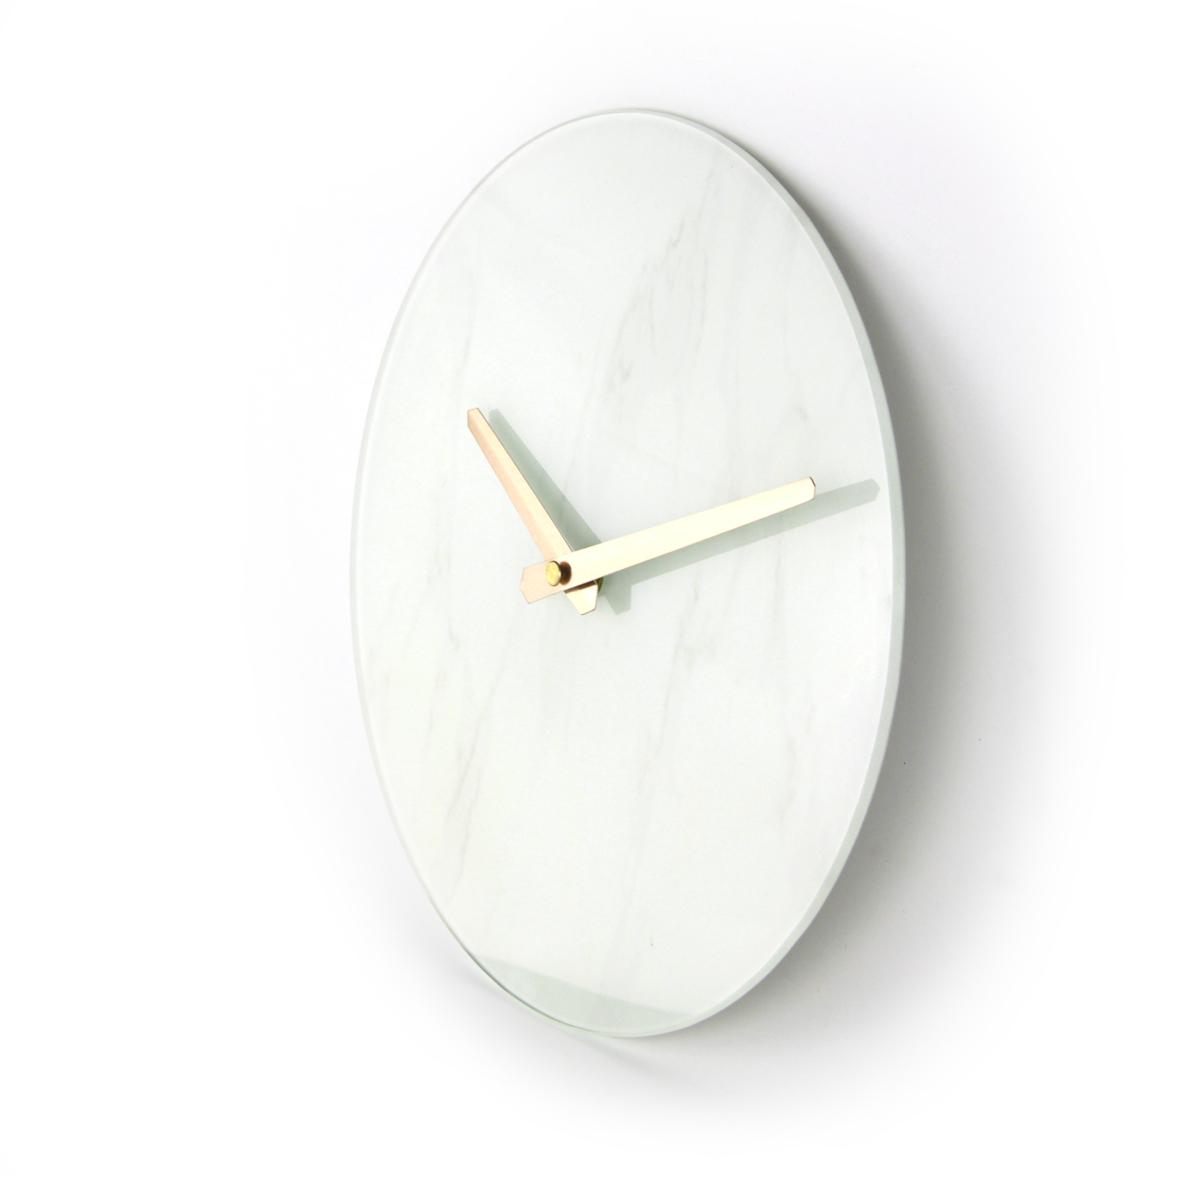 Platinet Wall Clock Marble Glass 25 X 3 5 Cm Shades Of White Gray